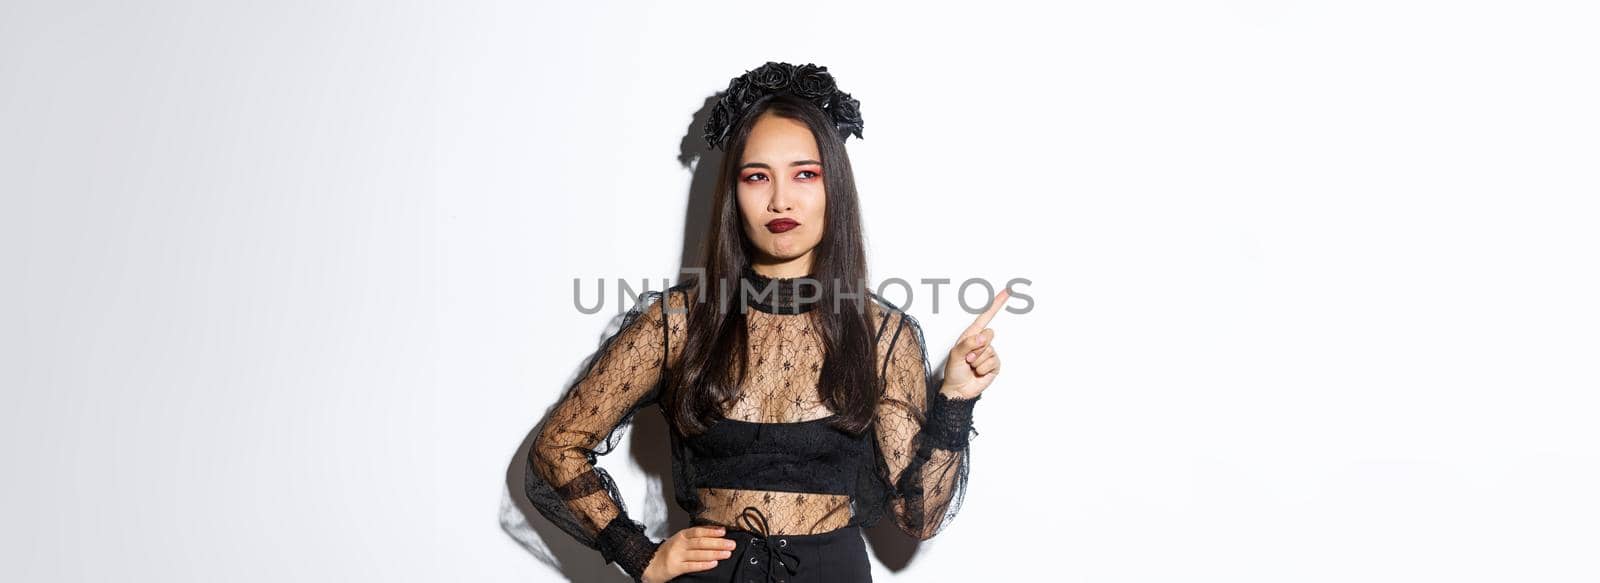 Unamused and skeptical asian beautiful woman in witch dress, looking at upper left corner with displeased smirk, standing over white background, showing logo or promo banner.